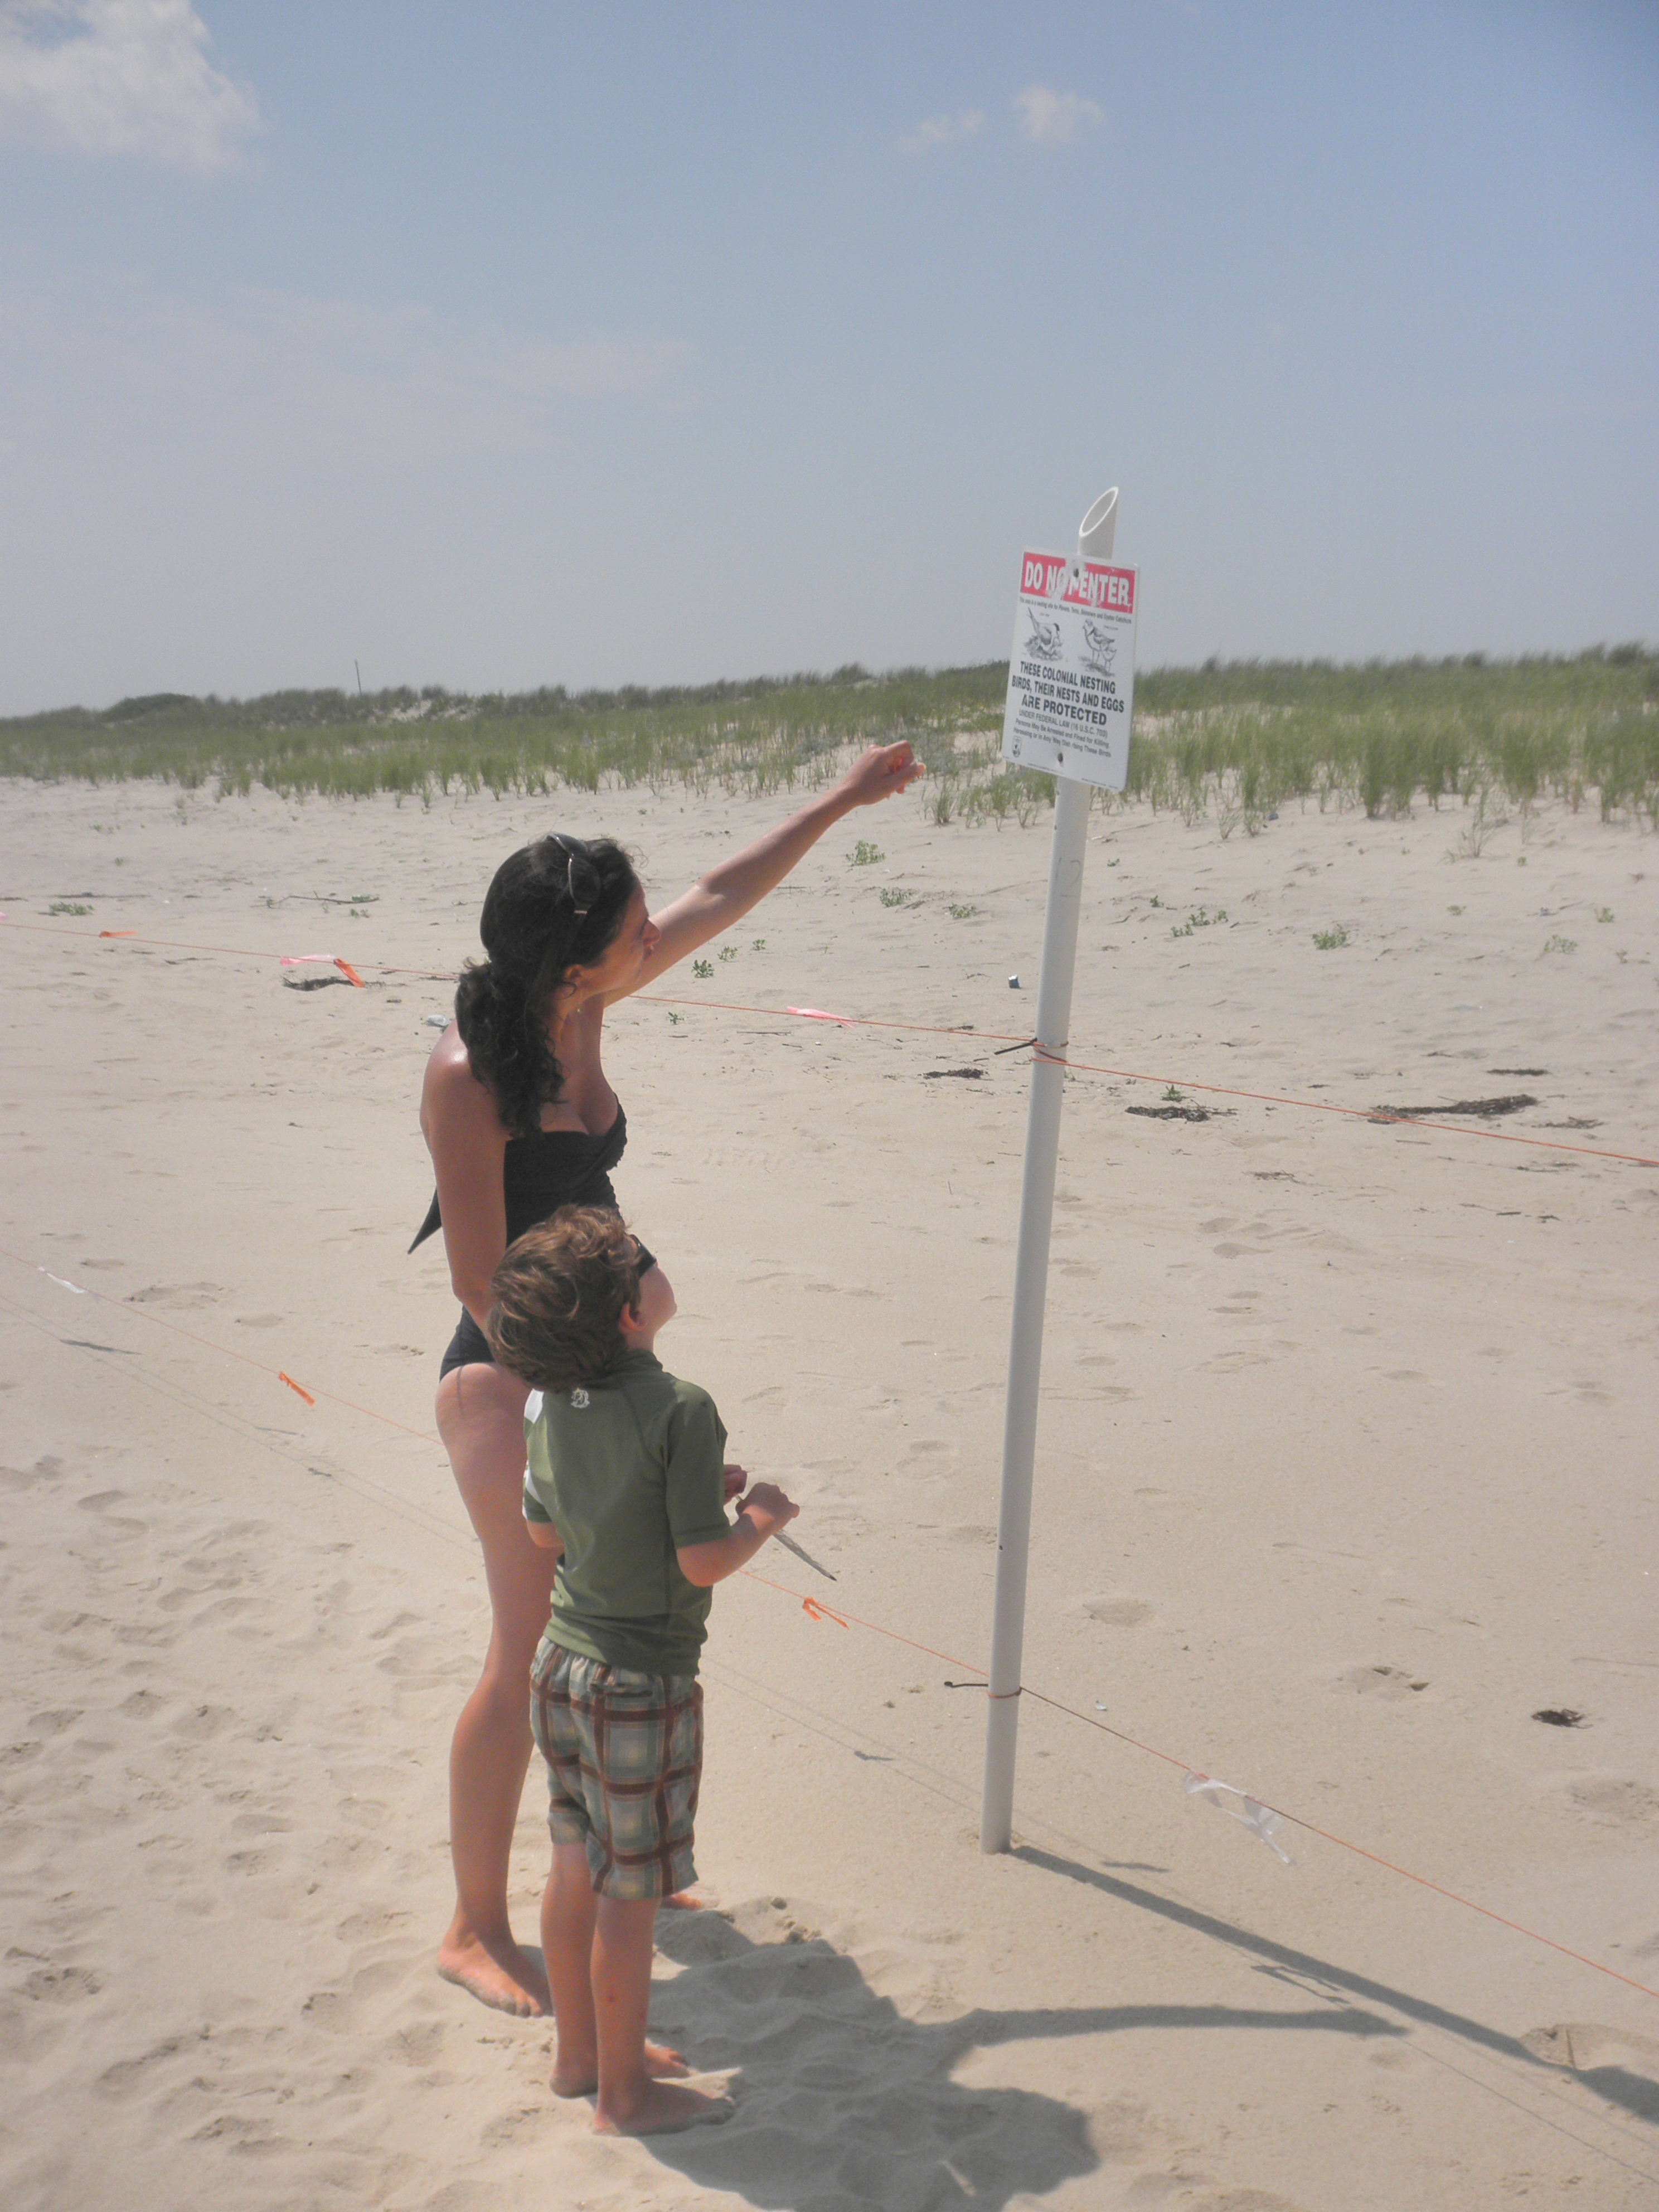 Two visitors view the closed area sign and learn about beach nesting birds